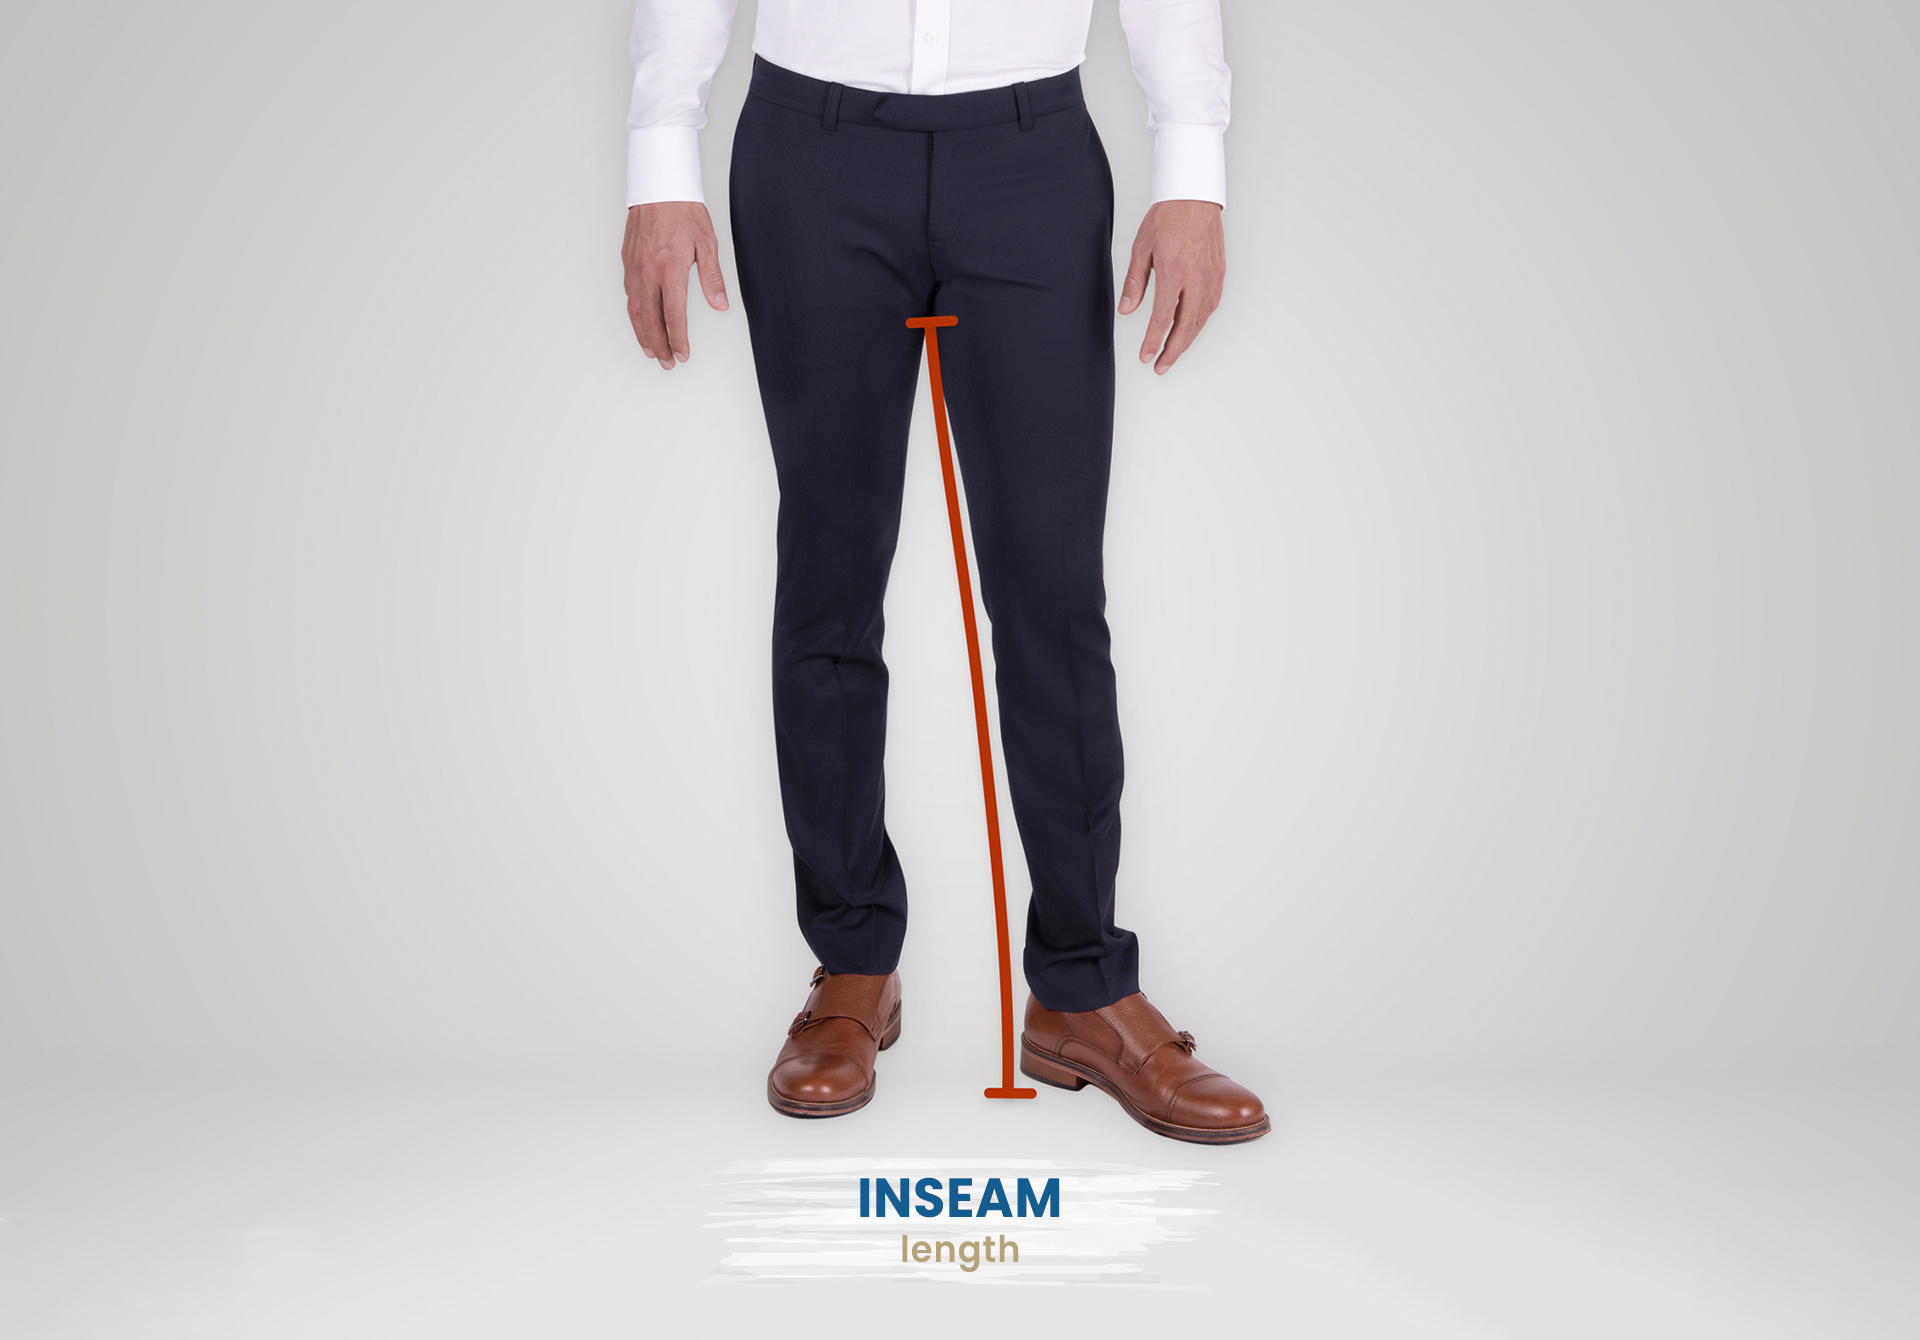 how to measure pants' inseam length